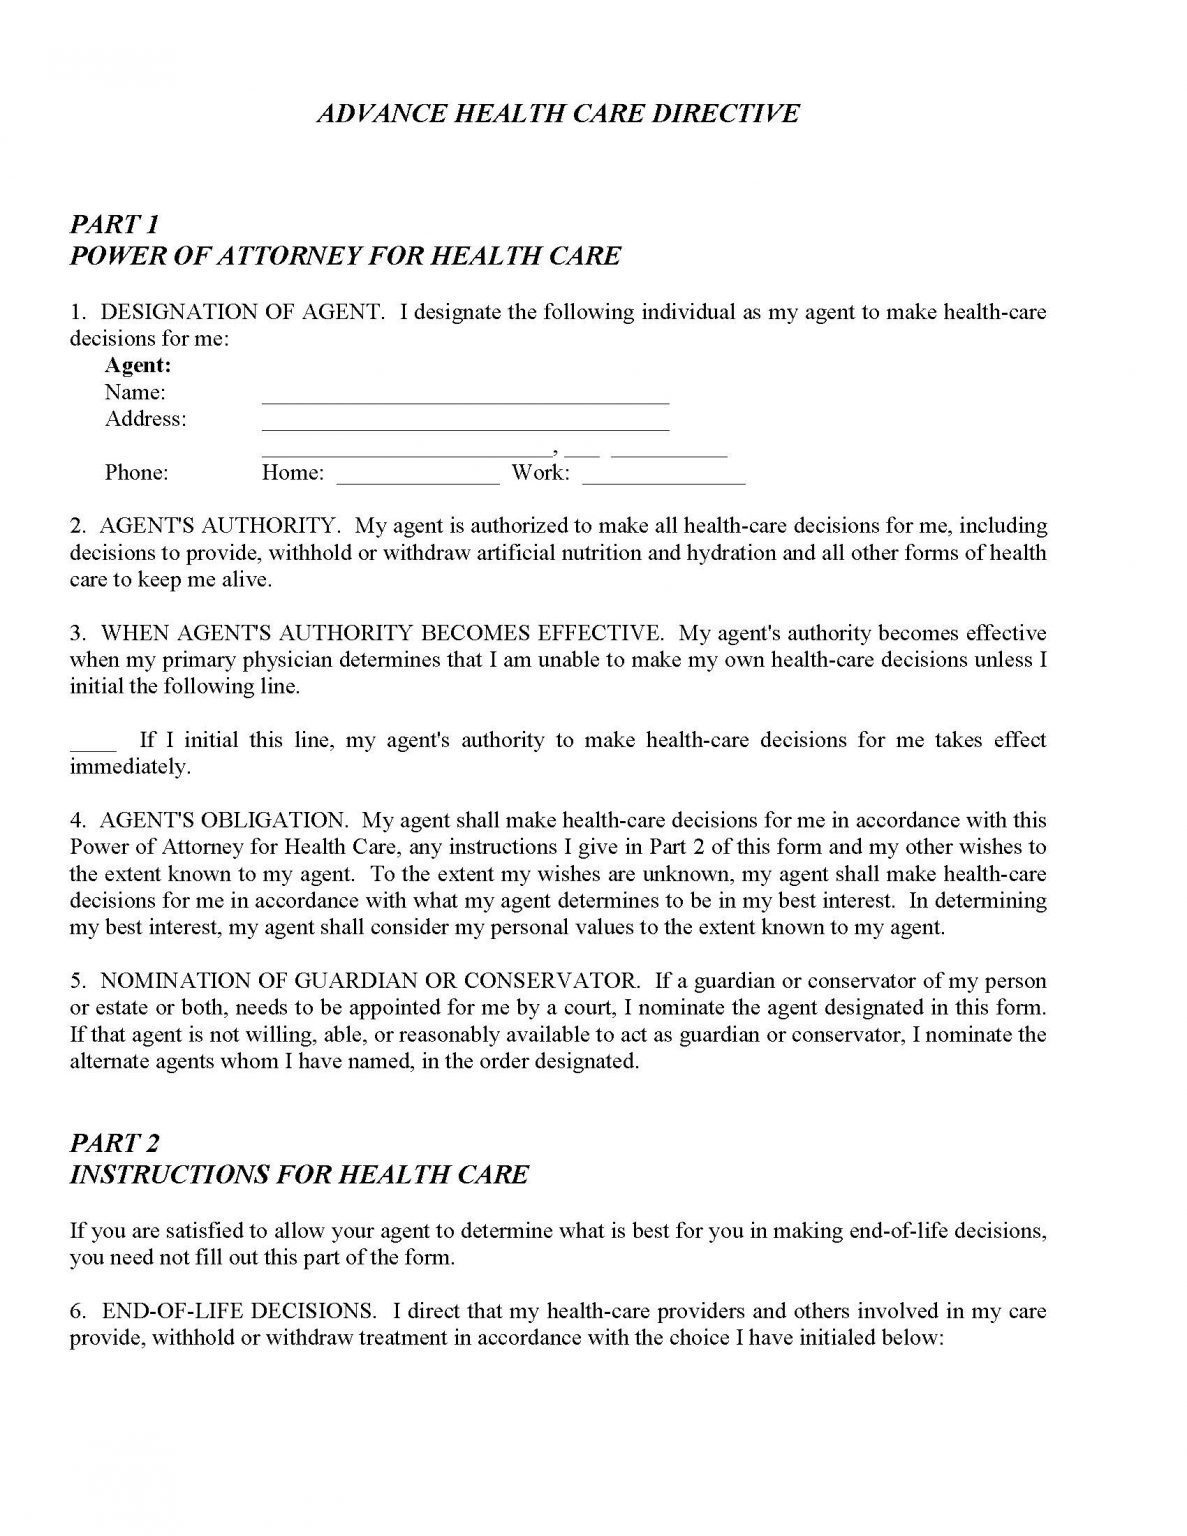 power-of-attorney-form-sars-cibc-power-of-attorney-form-fill-out-and-sign-printable